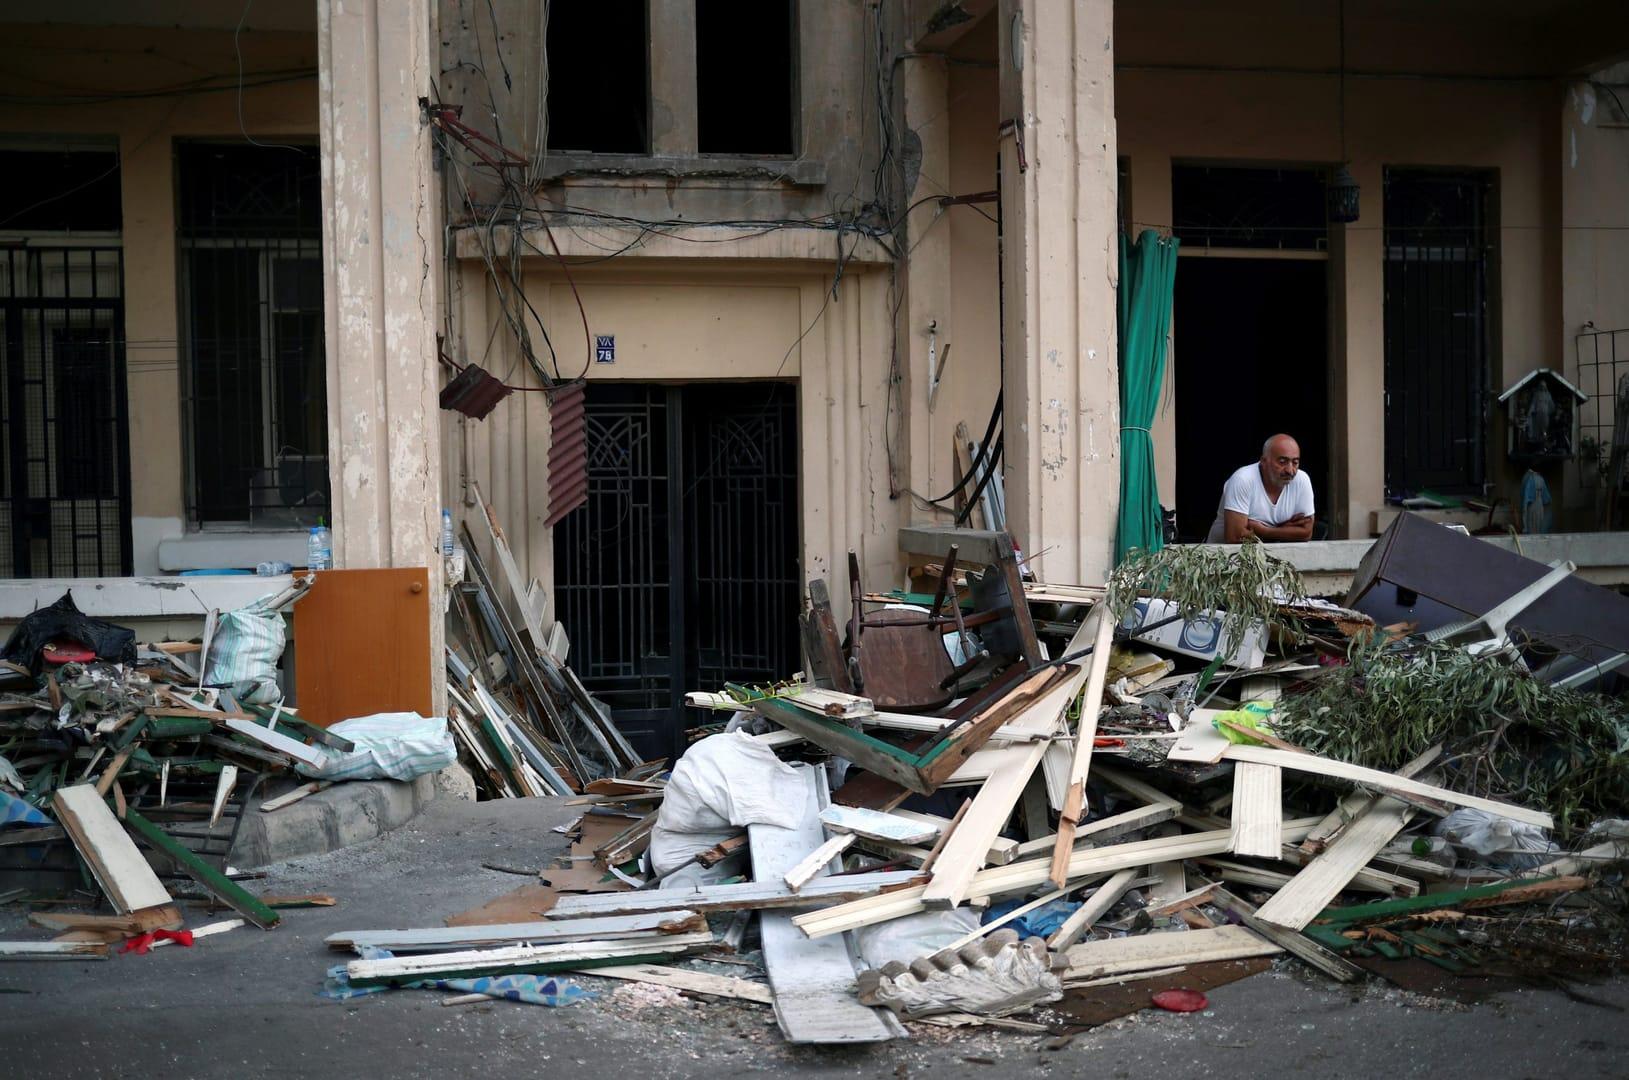 After blasts, Lebanese mobilize to pick up the pieces, physical and mental